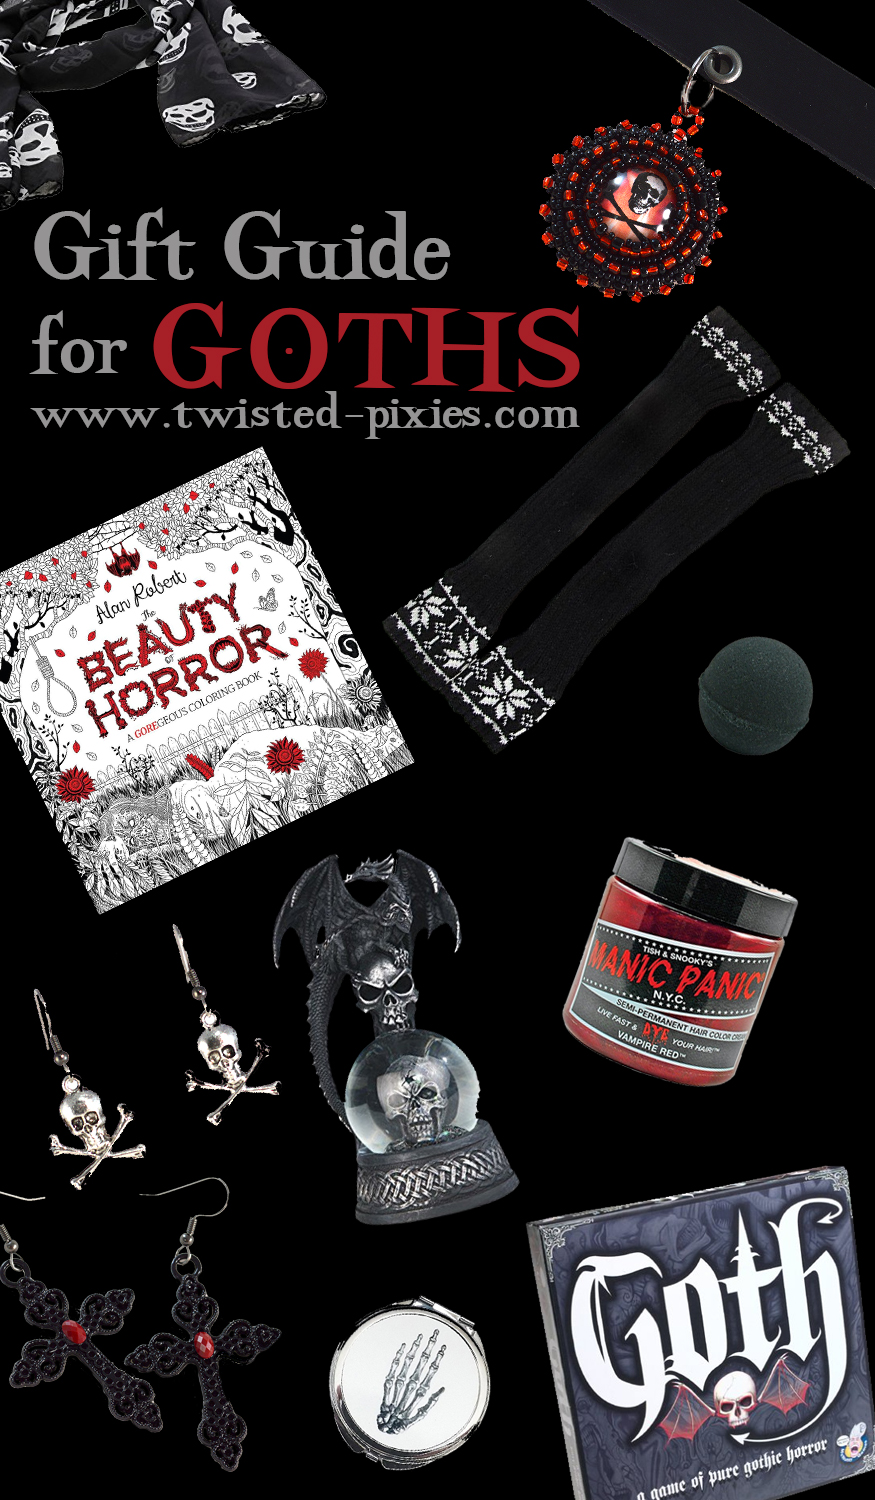 Gifts for goths: What to buy the person in your life who wears all